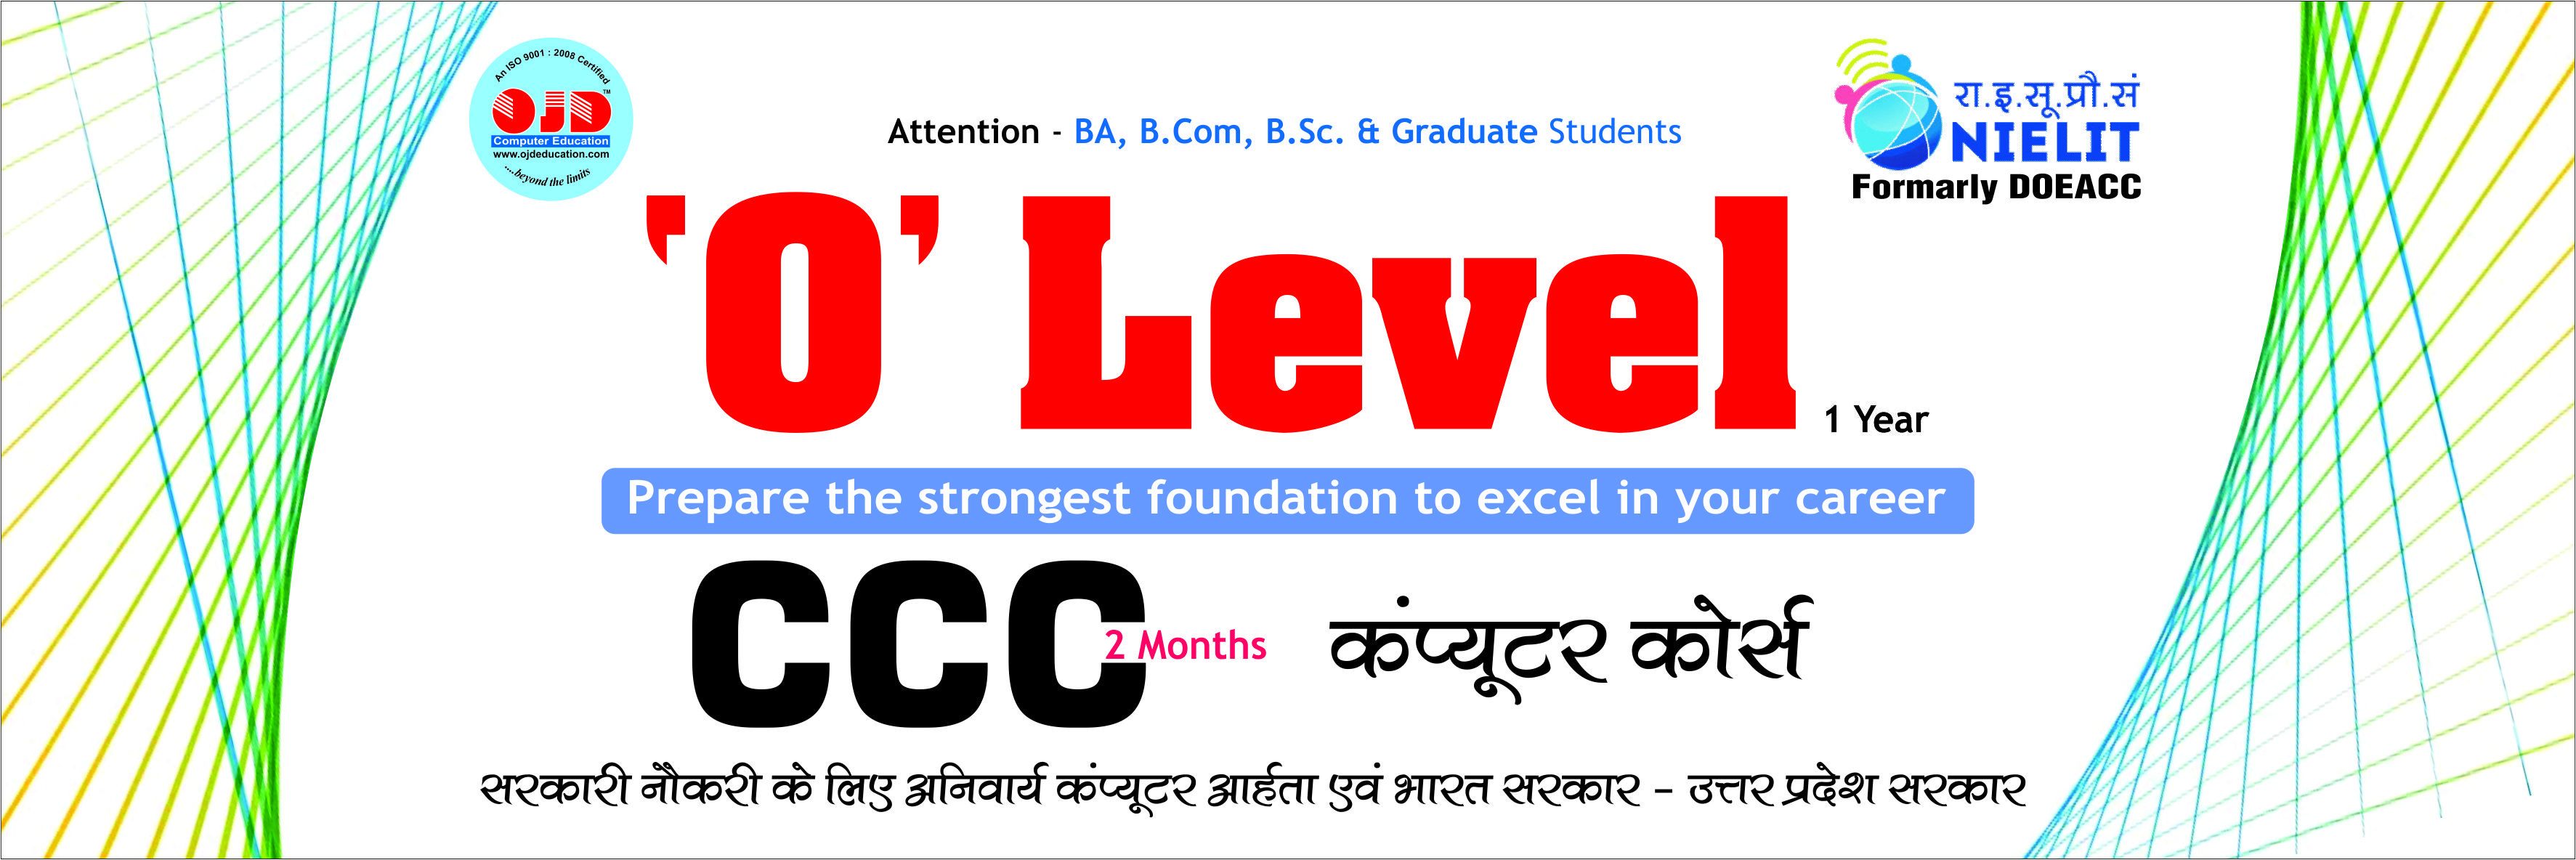 nielit courses in lucknow